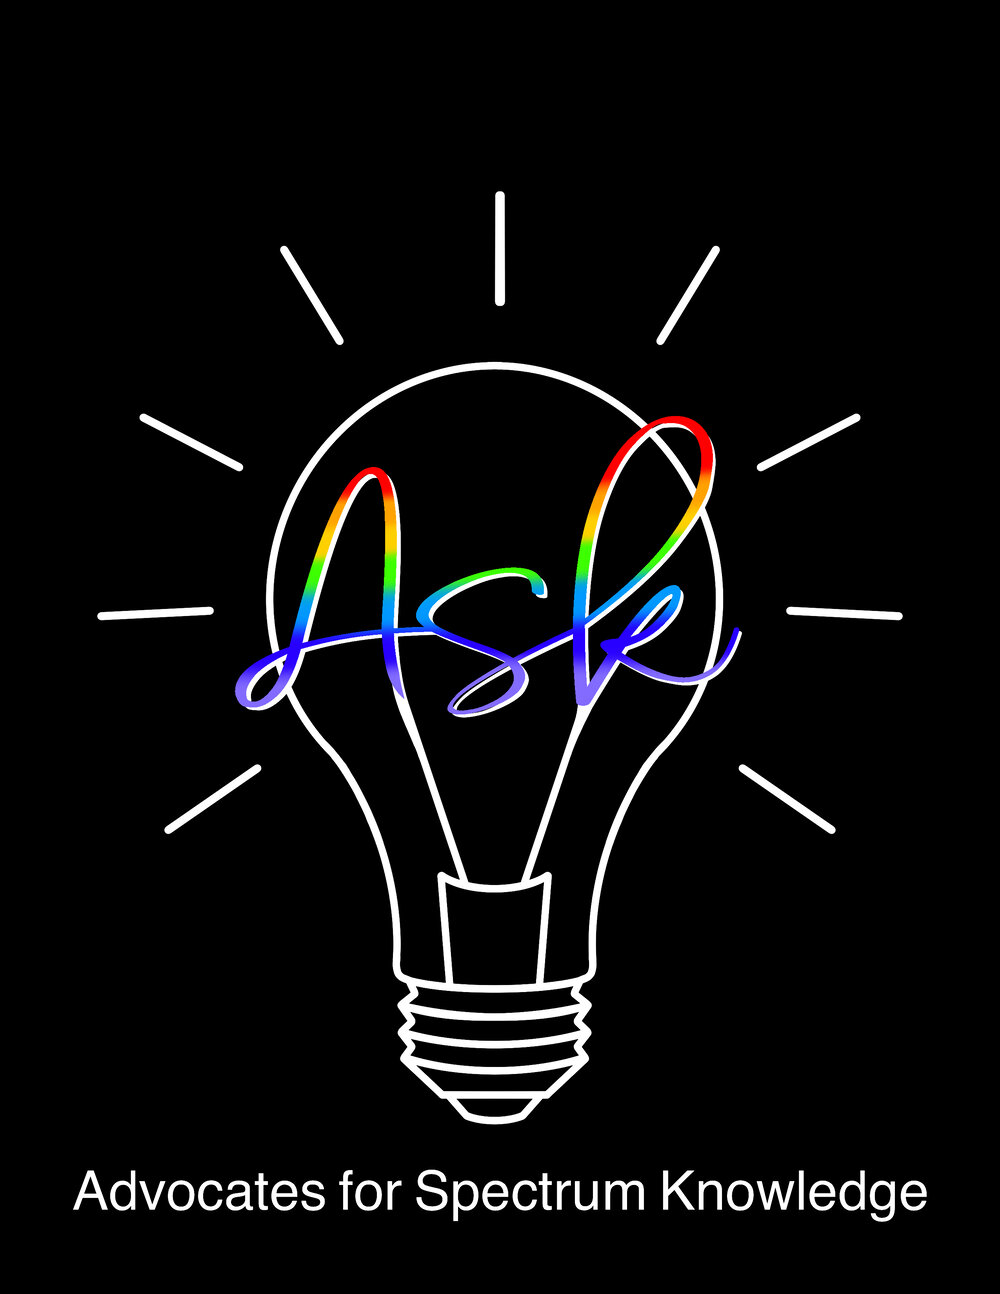 About — ASK: Advocates for Spectrum Knowledge